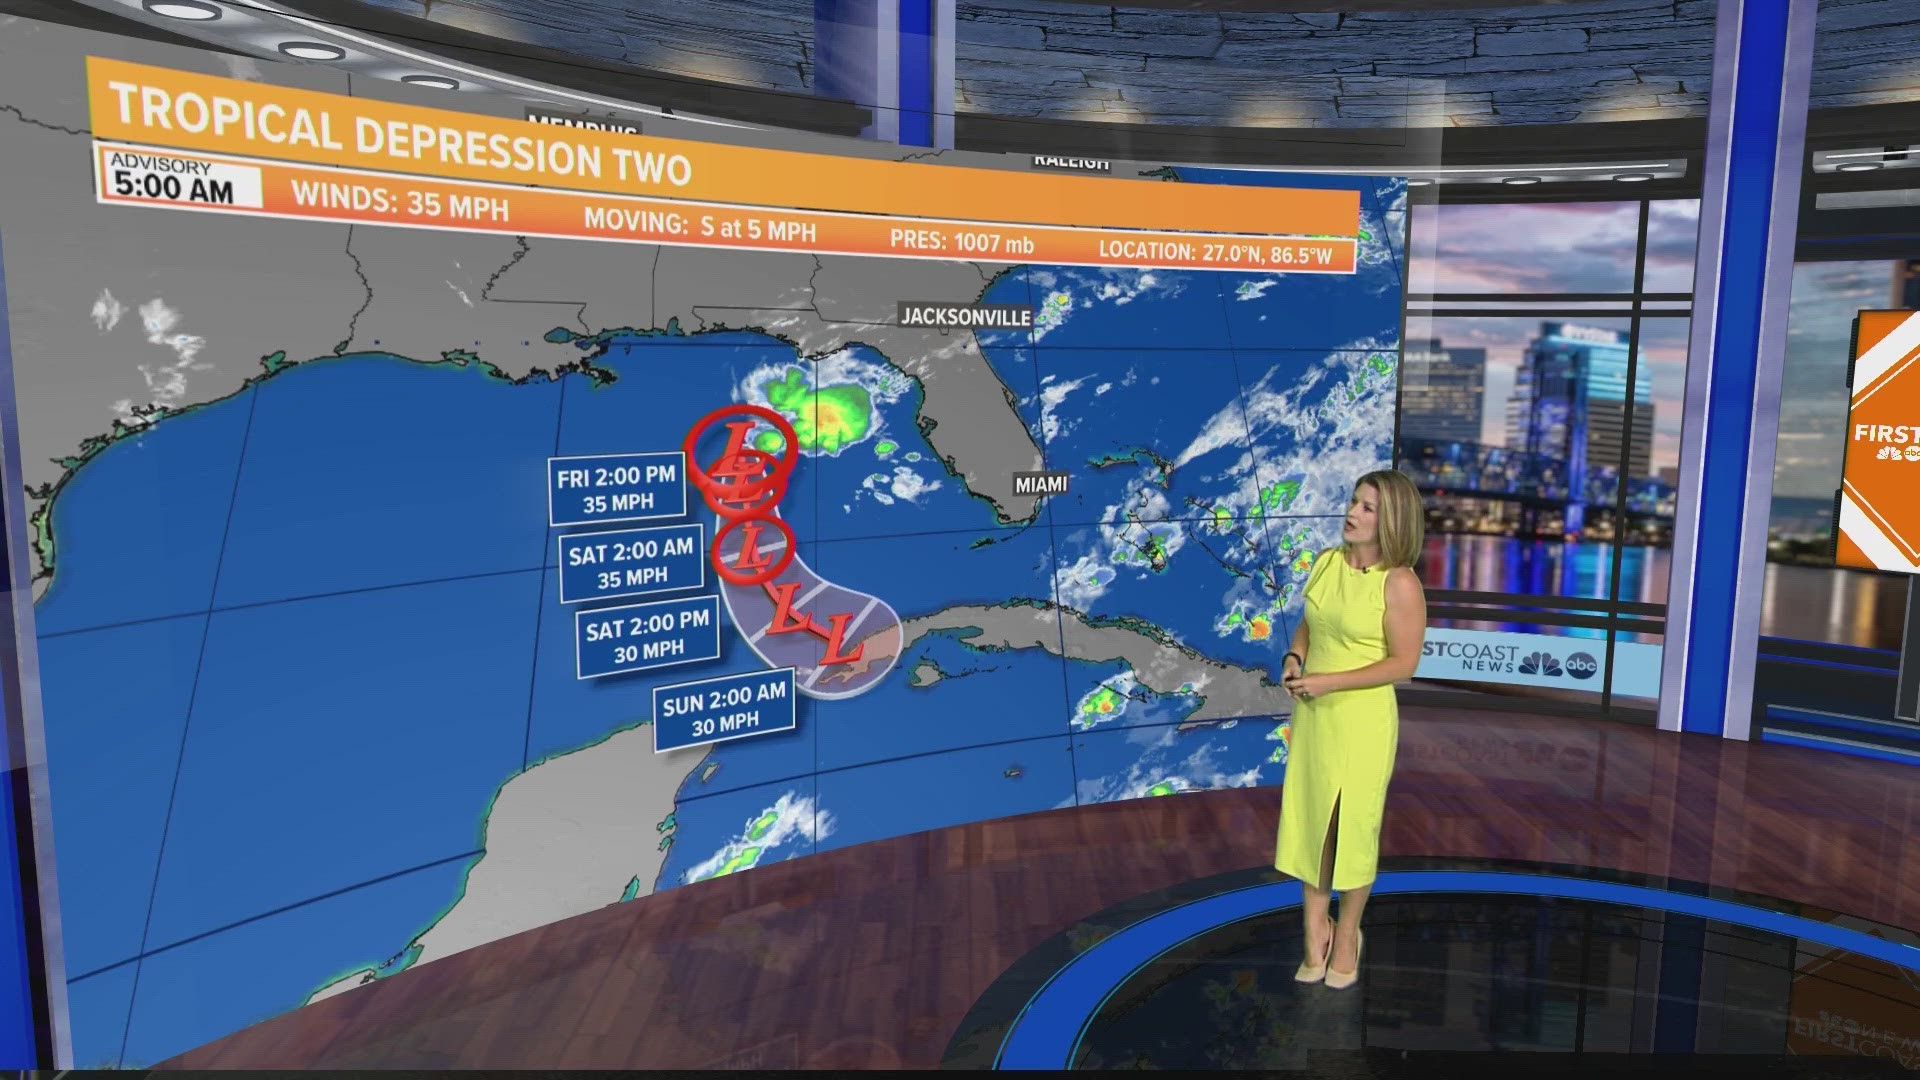 Meteorologist Lauren Rautenkranz says the window of opportunity for the Gulf depression to strengthen is closing.